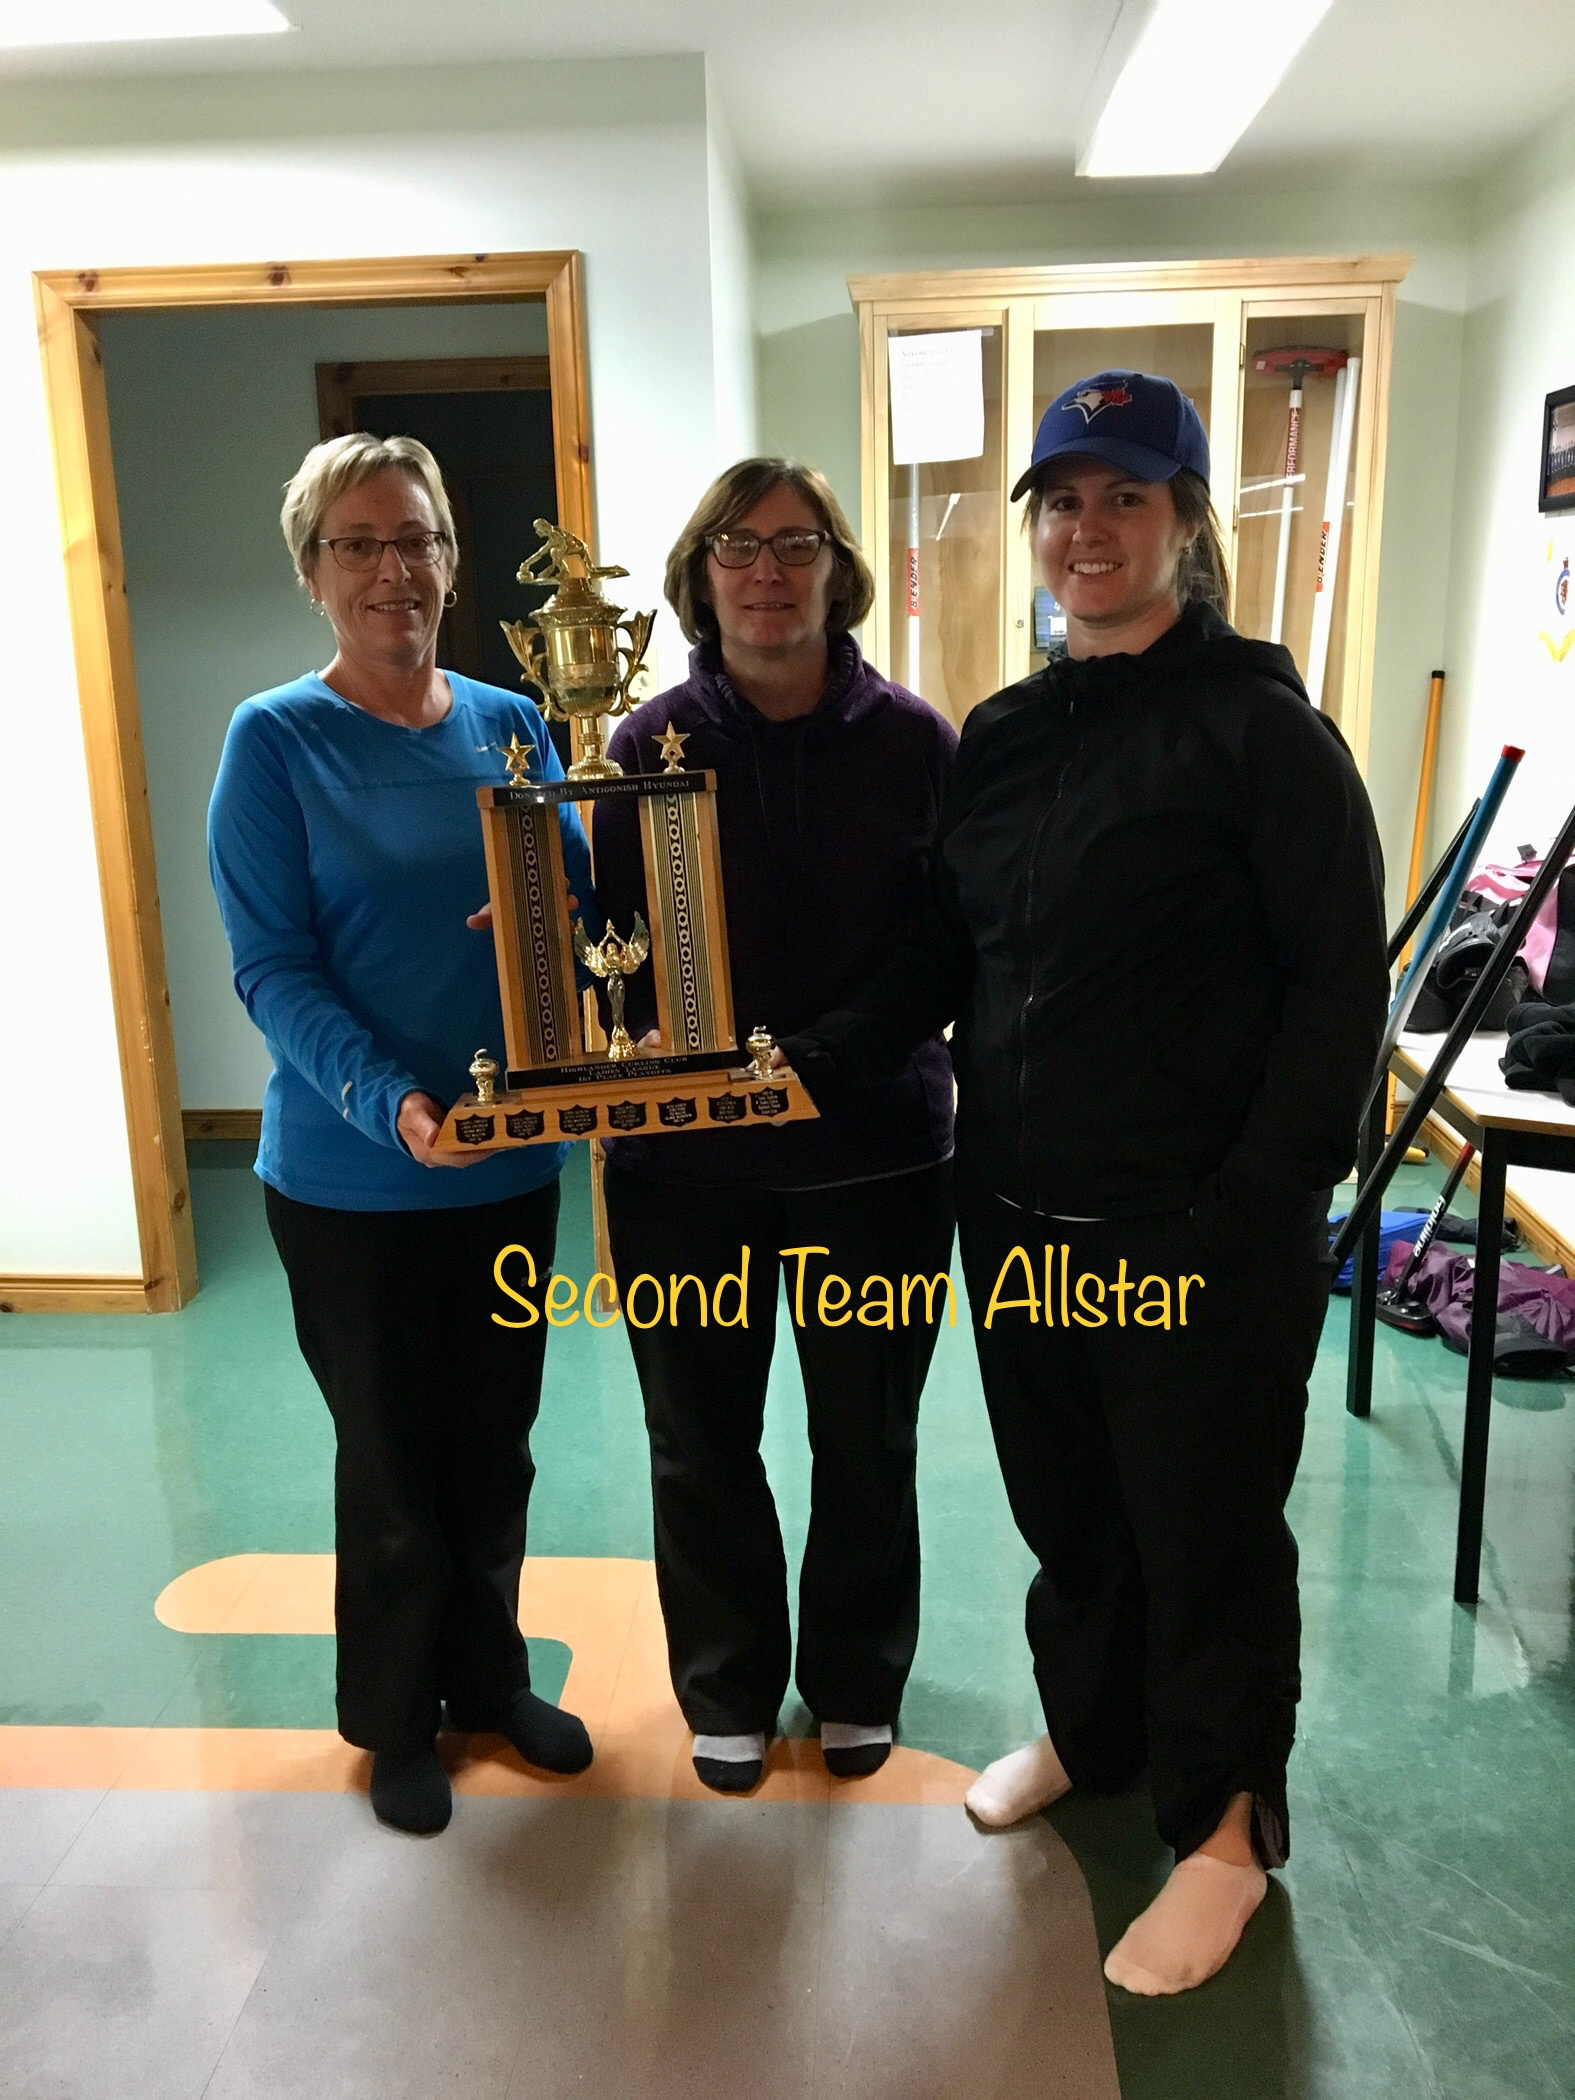 Tuesday Night Ladies Second Team Allstars
L to R: Judy Fraser, Joannie Bowie, Katie MacDonald
Missing: Marilyn Lohnes